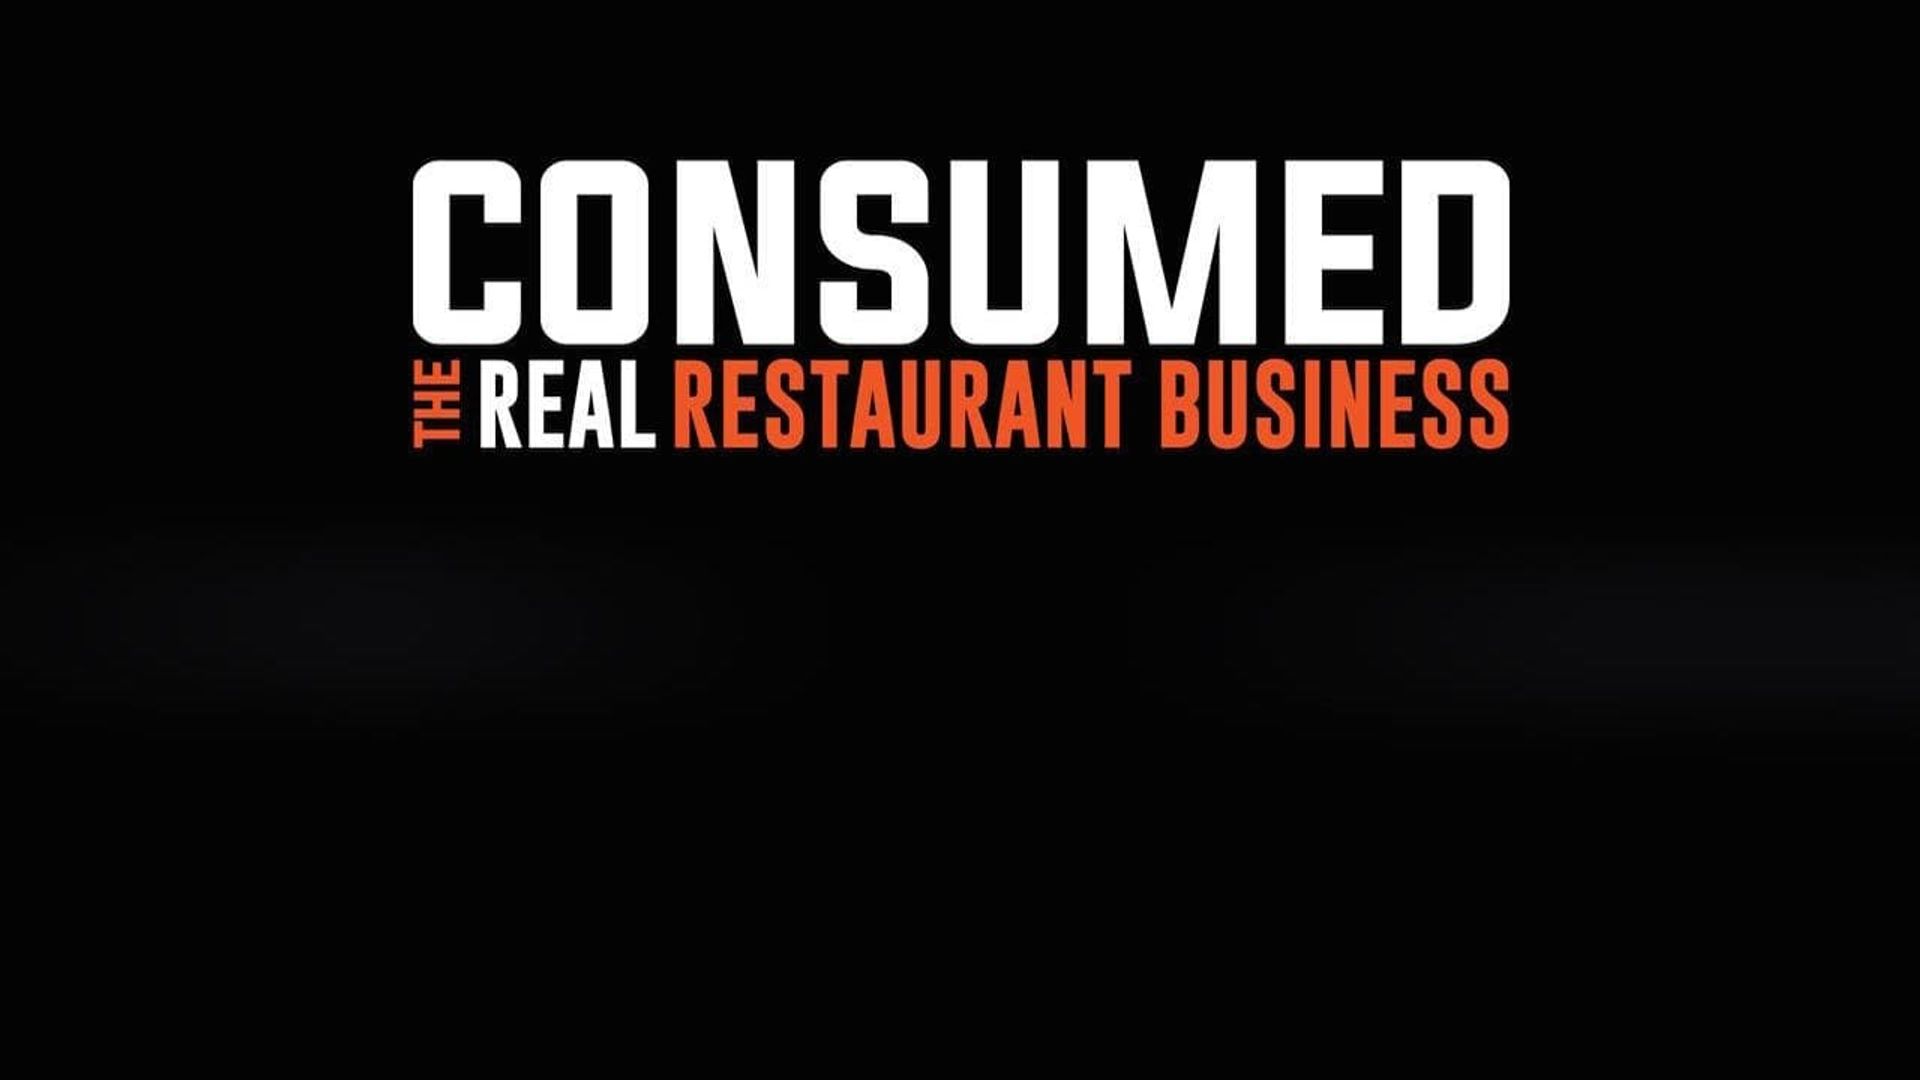 Consumed: The Real Restaurant Business Backdrop